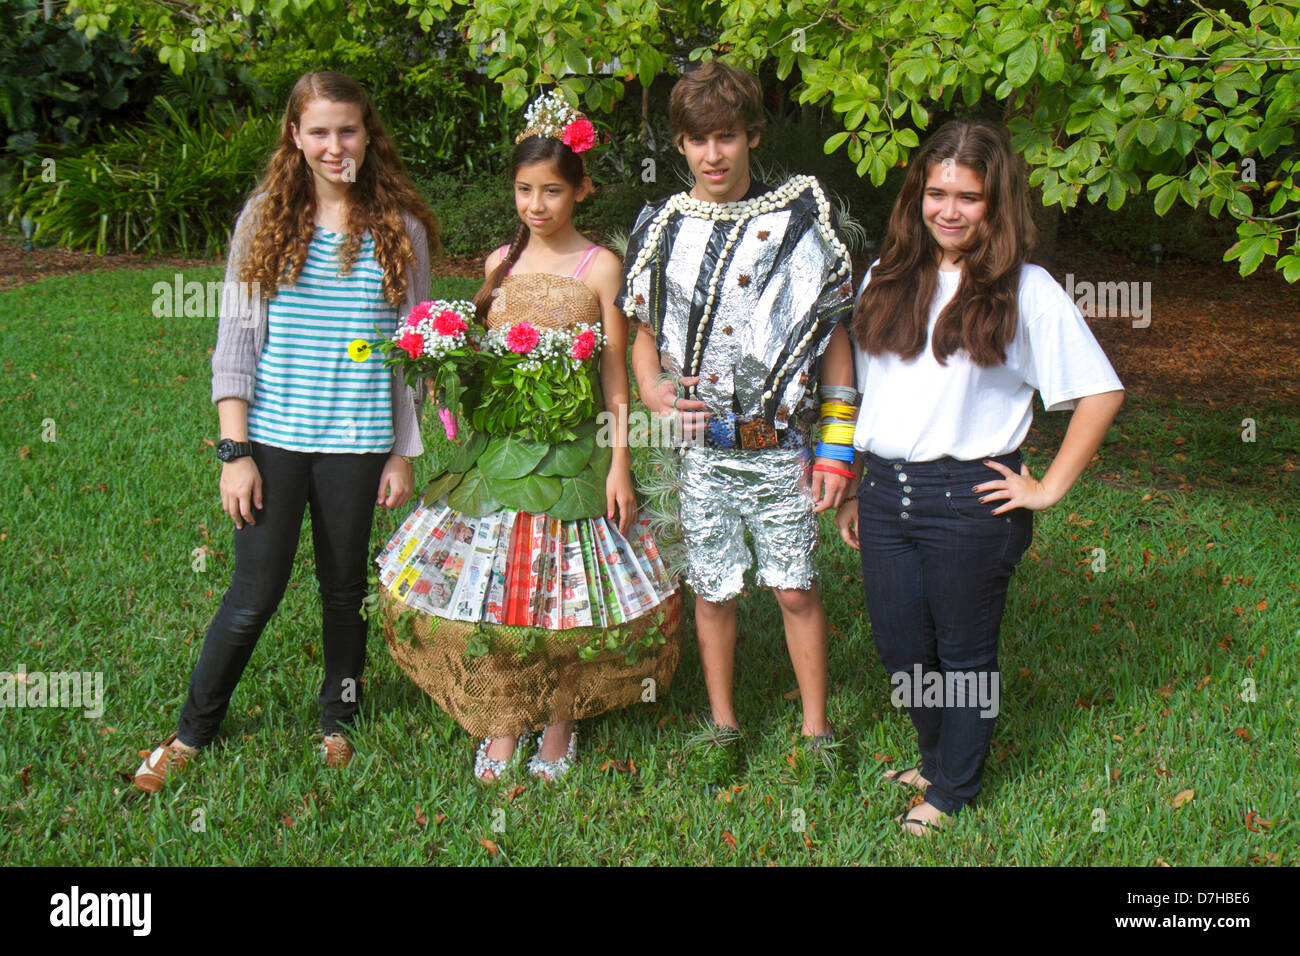 Miami Florida,Coral Gables,Fairchild Botanical Tropical Garden,student students education pupil pupils,girl girls,youngster youngsters youth youths fe Stock Photo